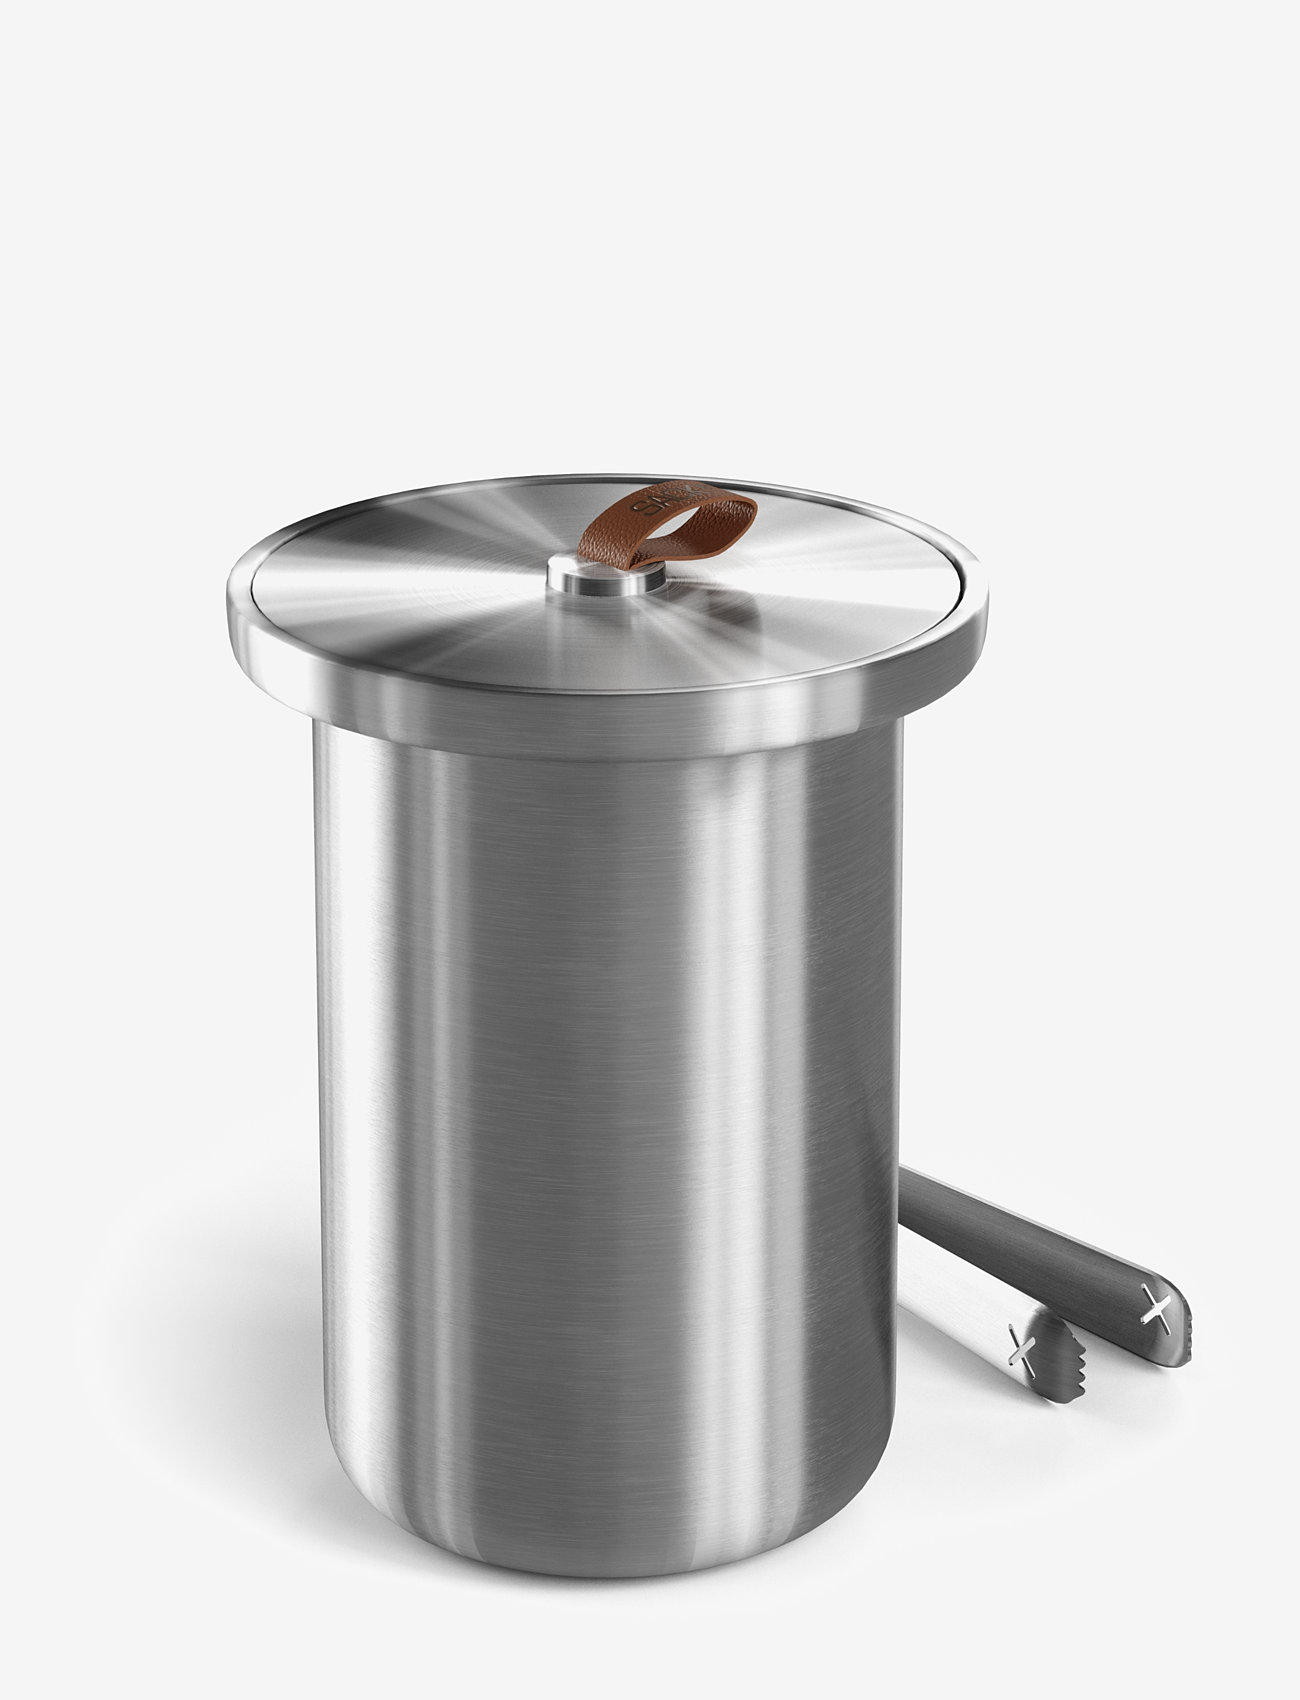 SACKit - Wine Cooler - isspande - stainless steel - 0